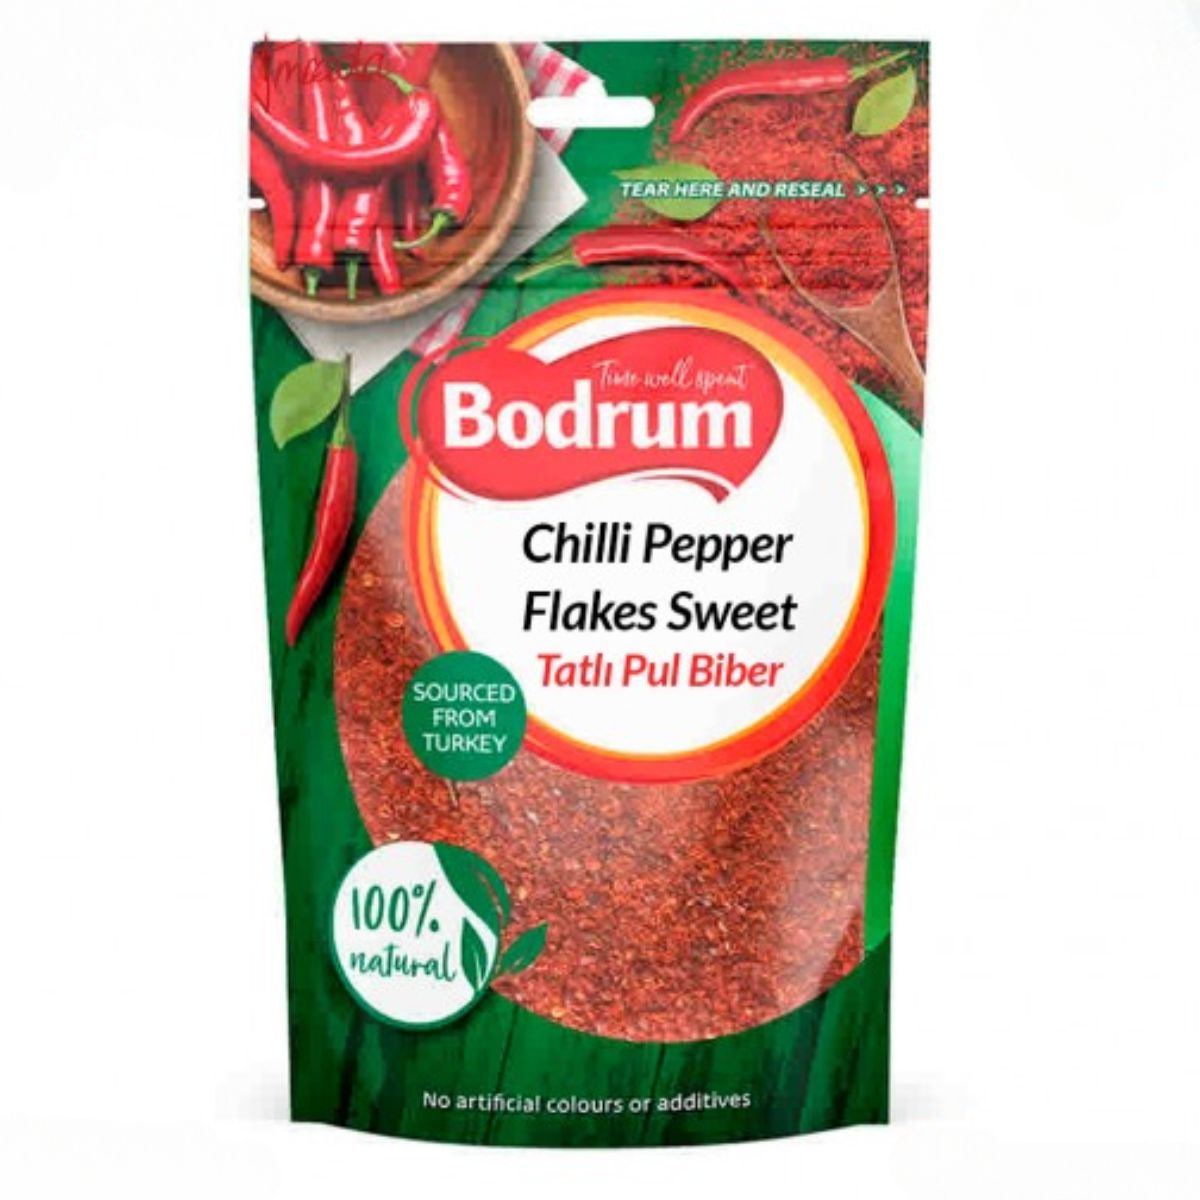 Package of Bodrum - Sweet Chili Pepper Flakes - 100g, labeled "sourced from turkey" and "100% natural colors or additives," with an image of chili peppers and flakes.